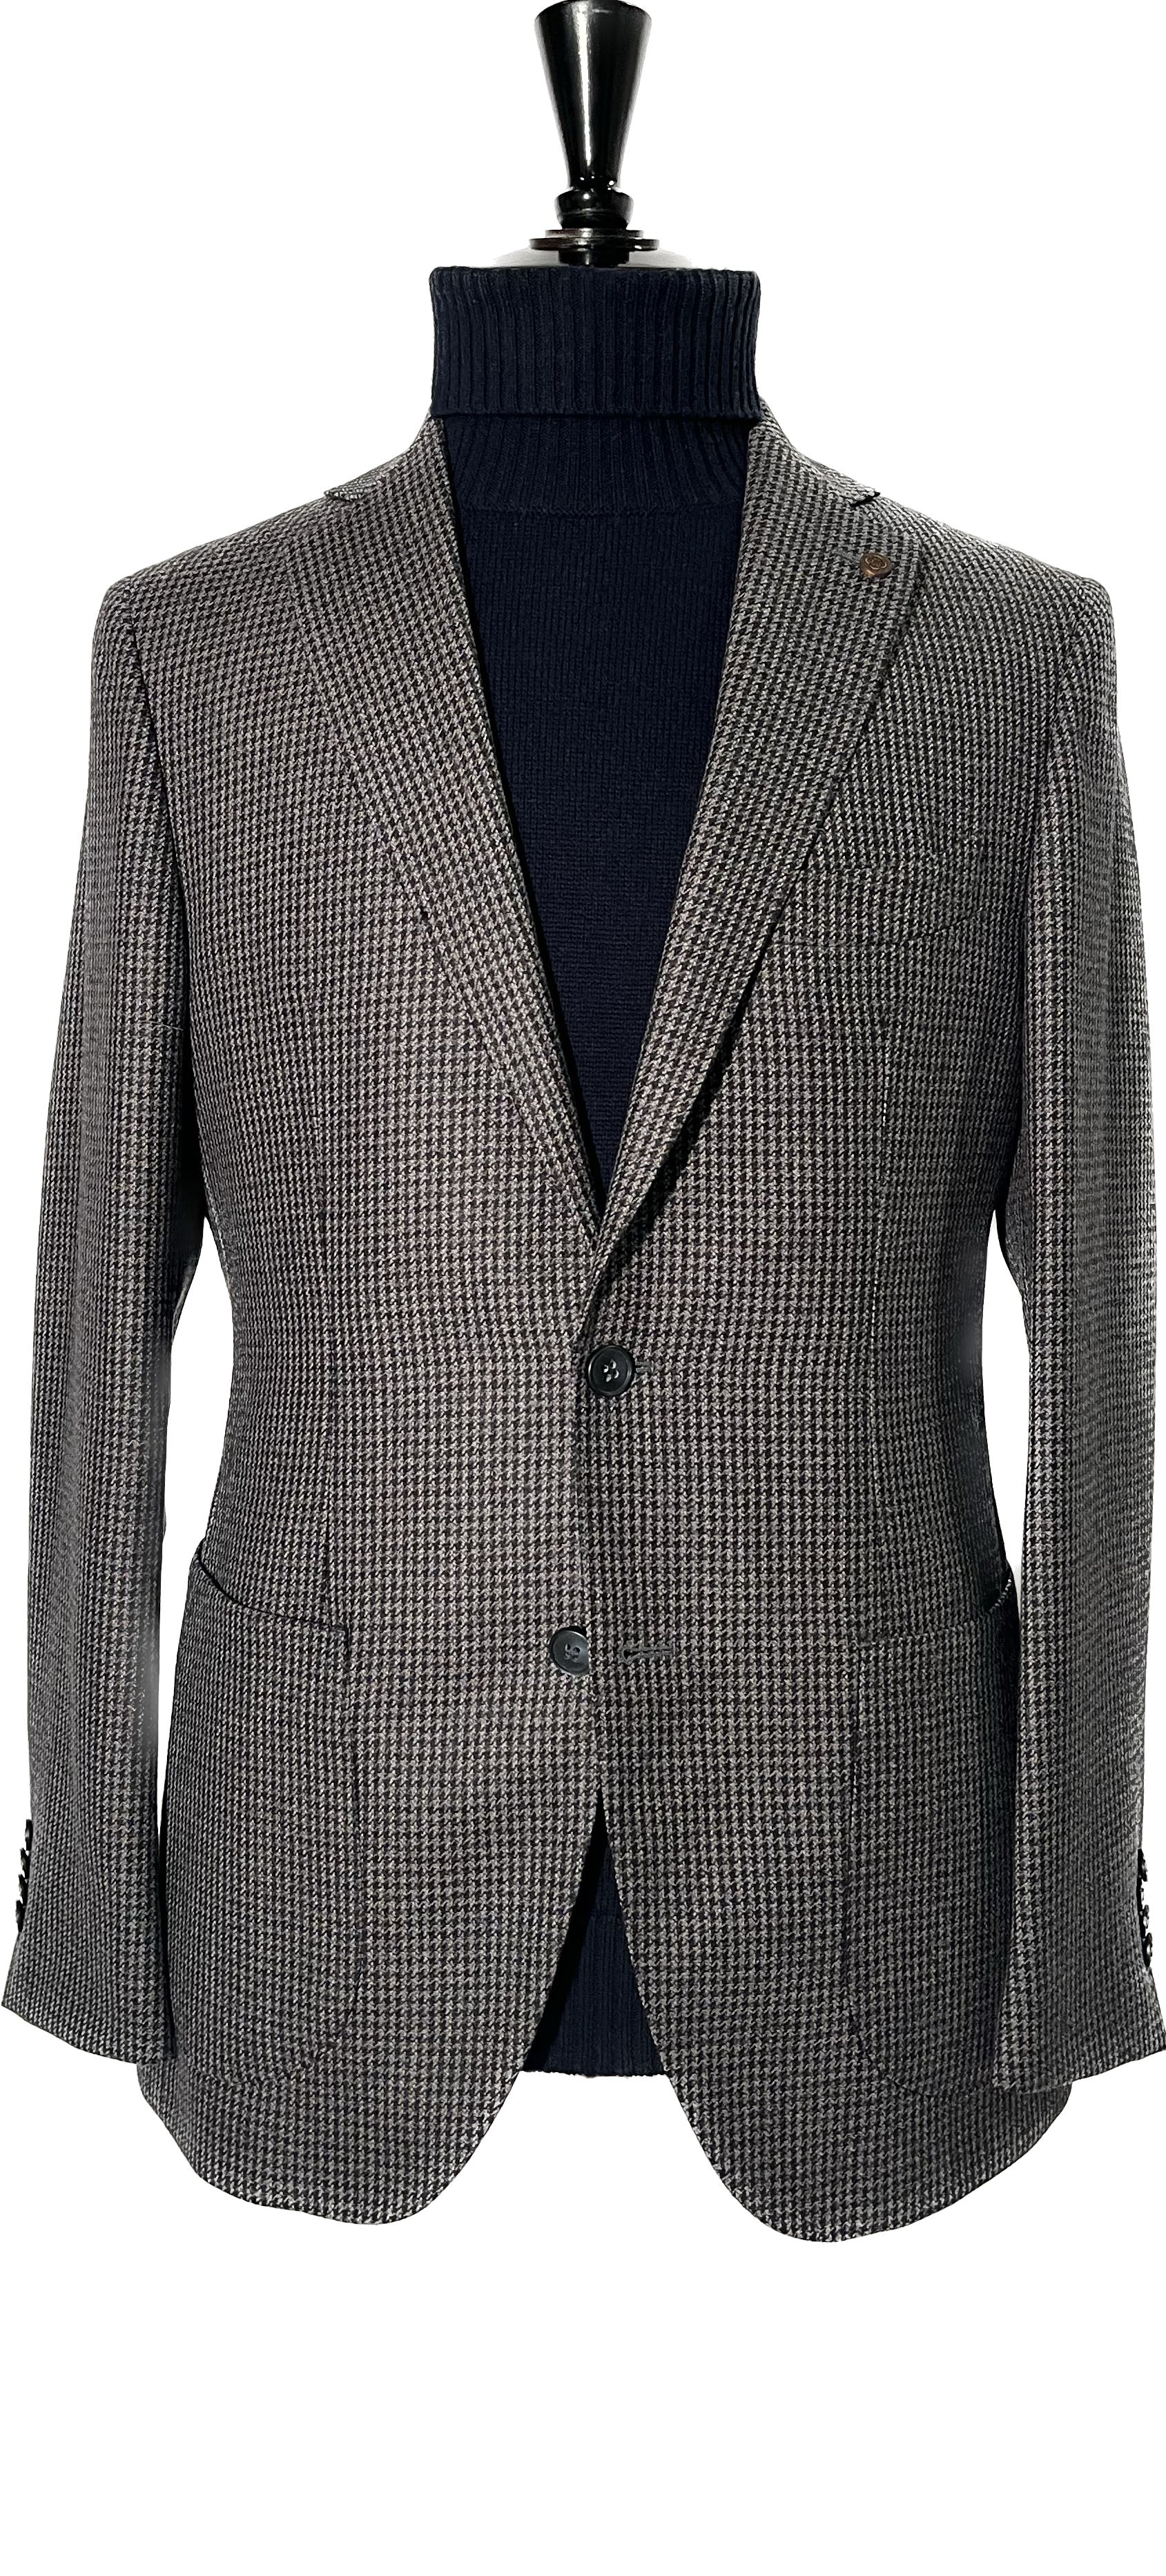 CAVALIERE - VALTER 2 Button Slim Fit Jacket in Dark Blue and Coffee 10AW23409-98